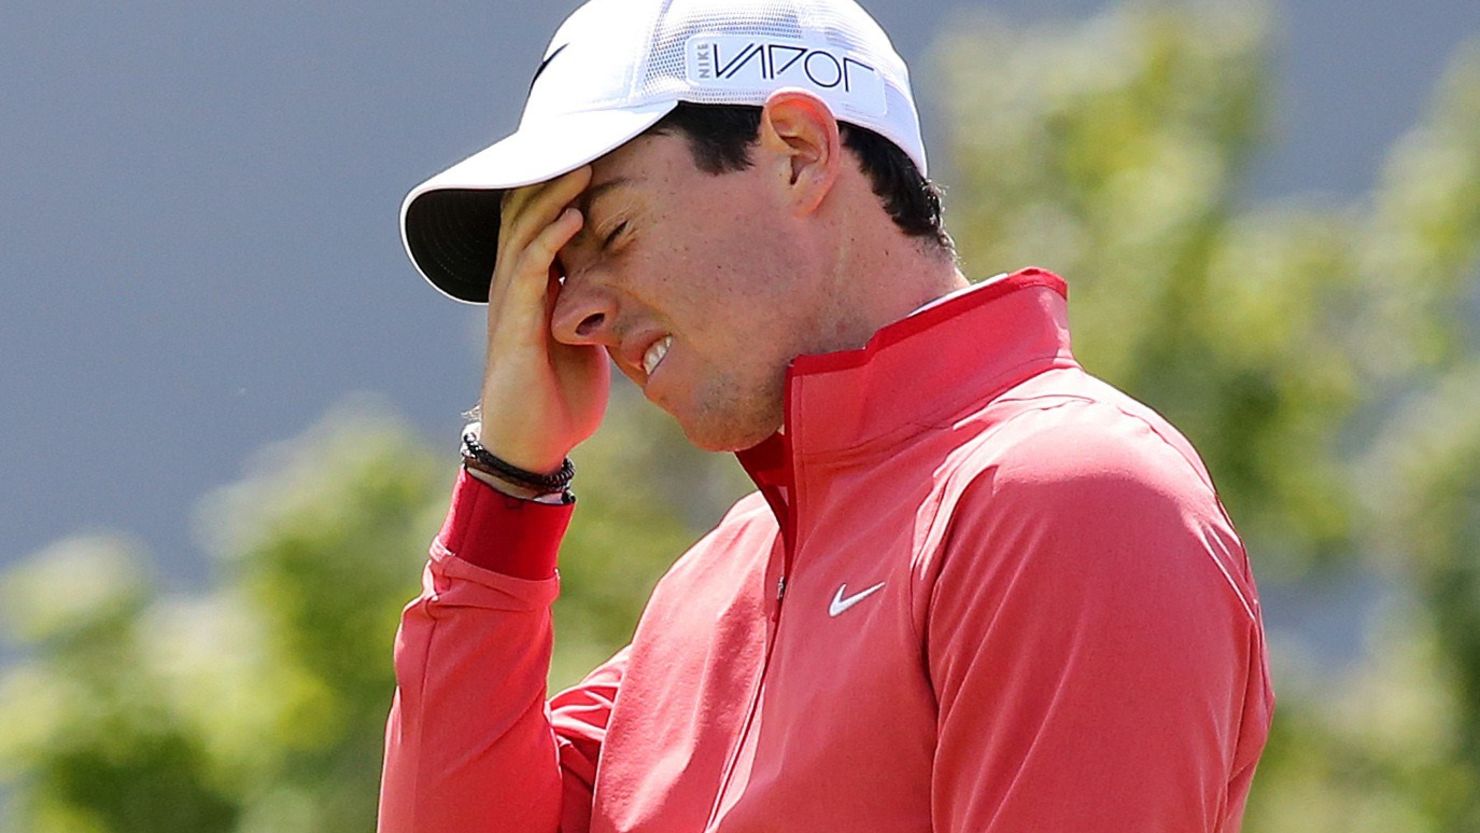 A look which says it all. Rory McIlroy endured a sorry start to his Irish Open challenge.